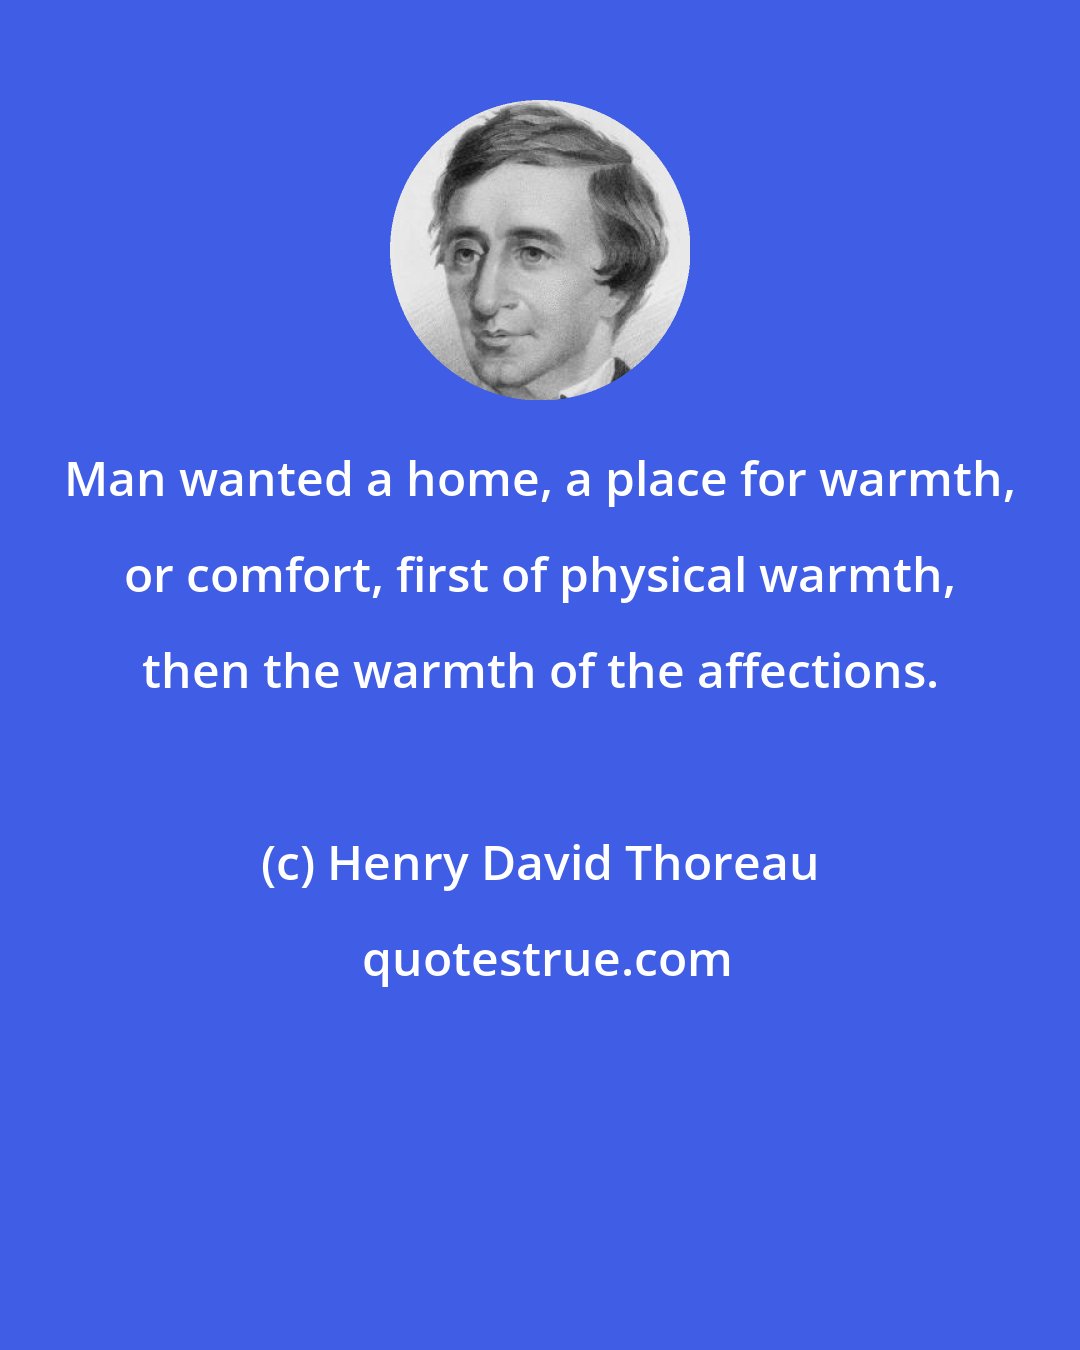 Henry David Thoreau: Man wanted a home, a place for warmth, or comfort, first of physical warmth, then the warmth of the affections.